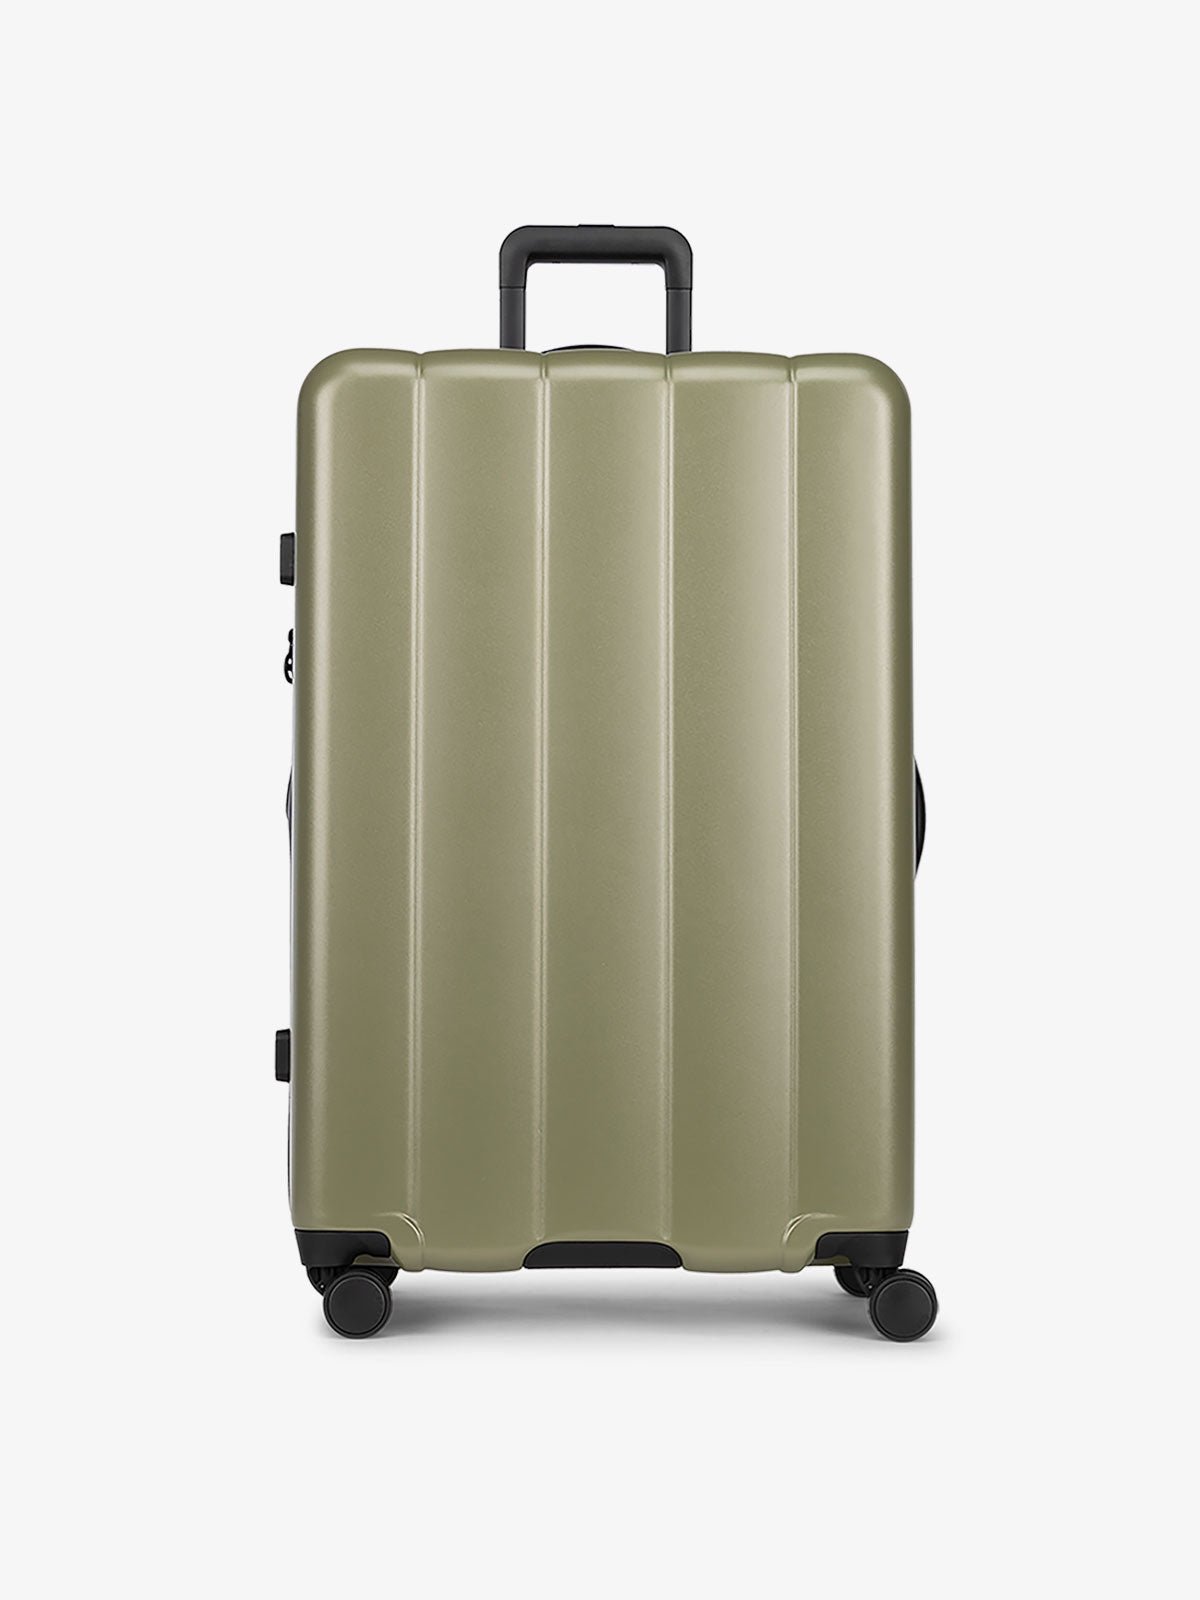 Pistachio green large luggage made from an ultra-durable polycarbonate shell and expandable by up to 2"